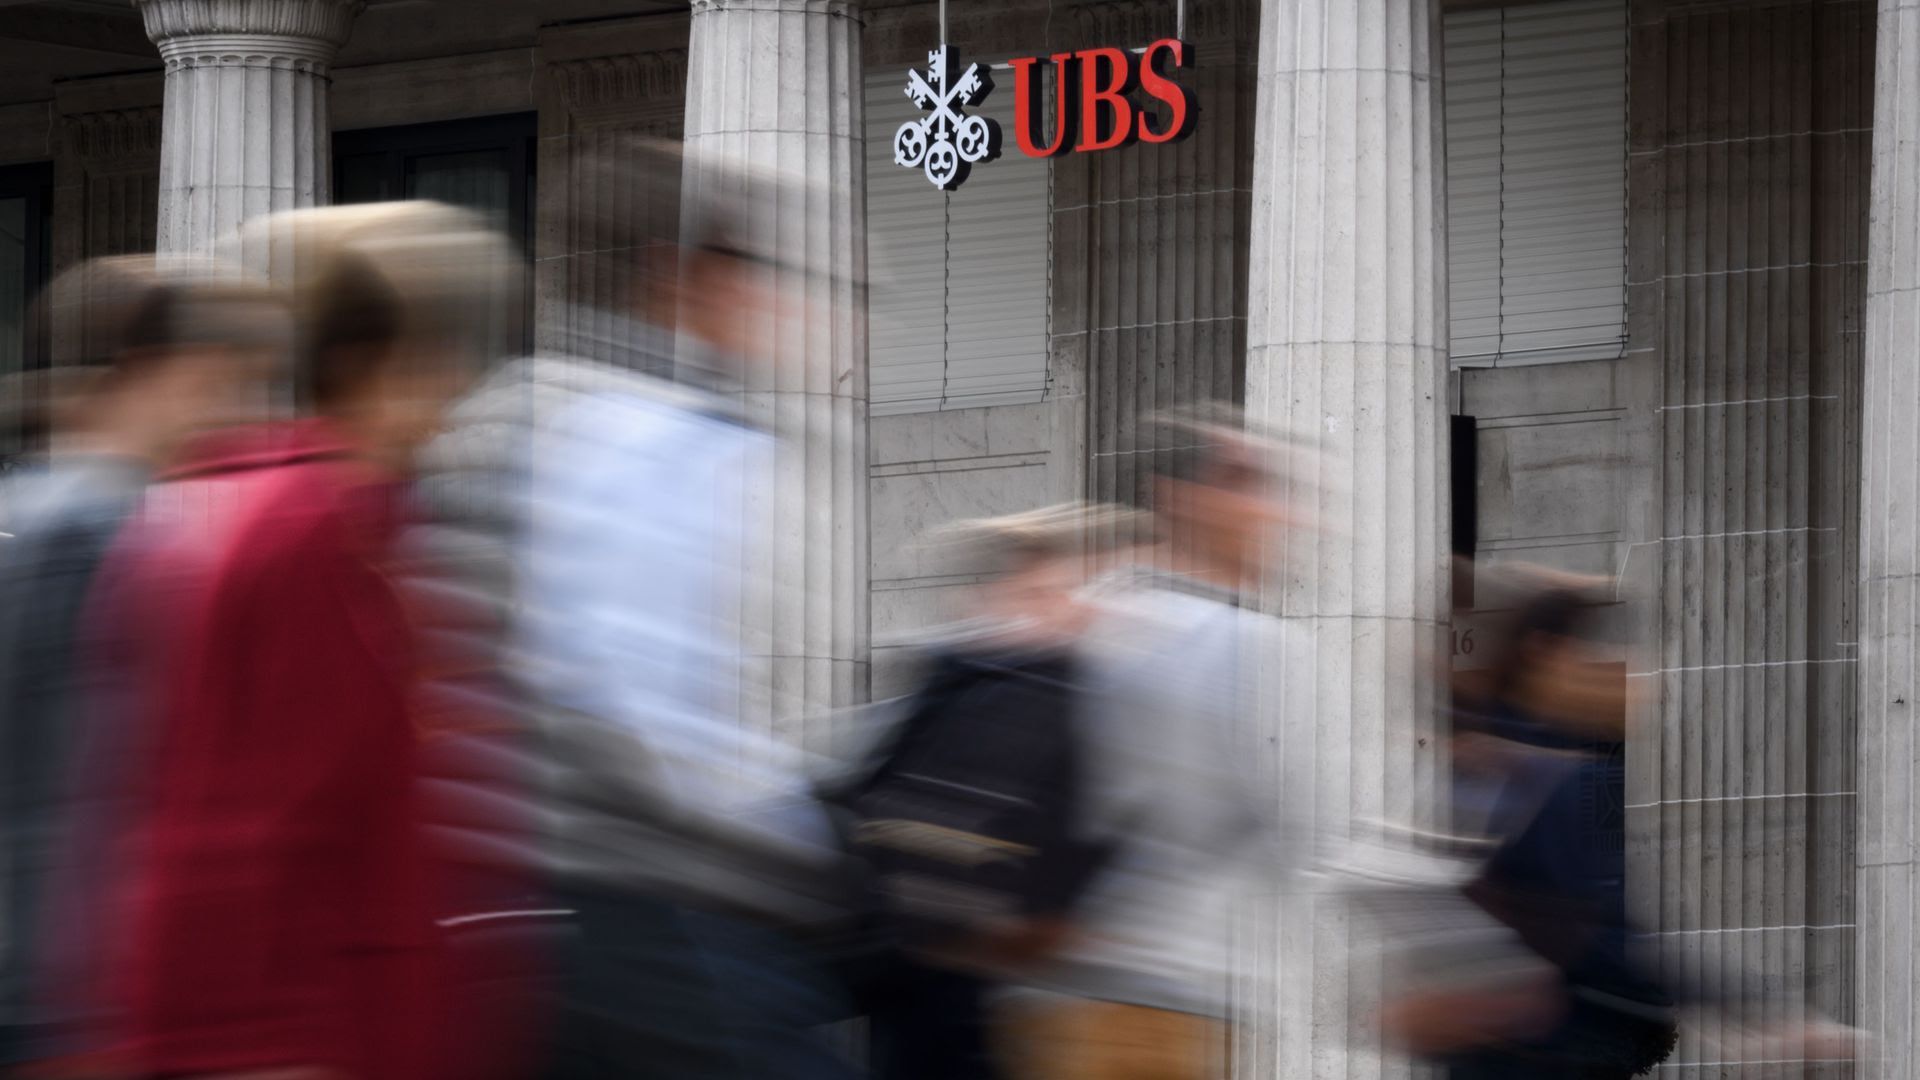 UBS front